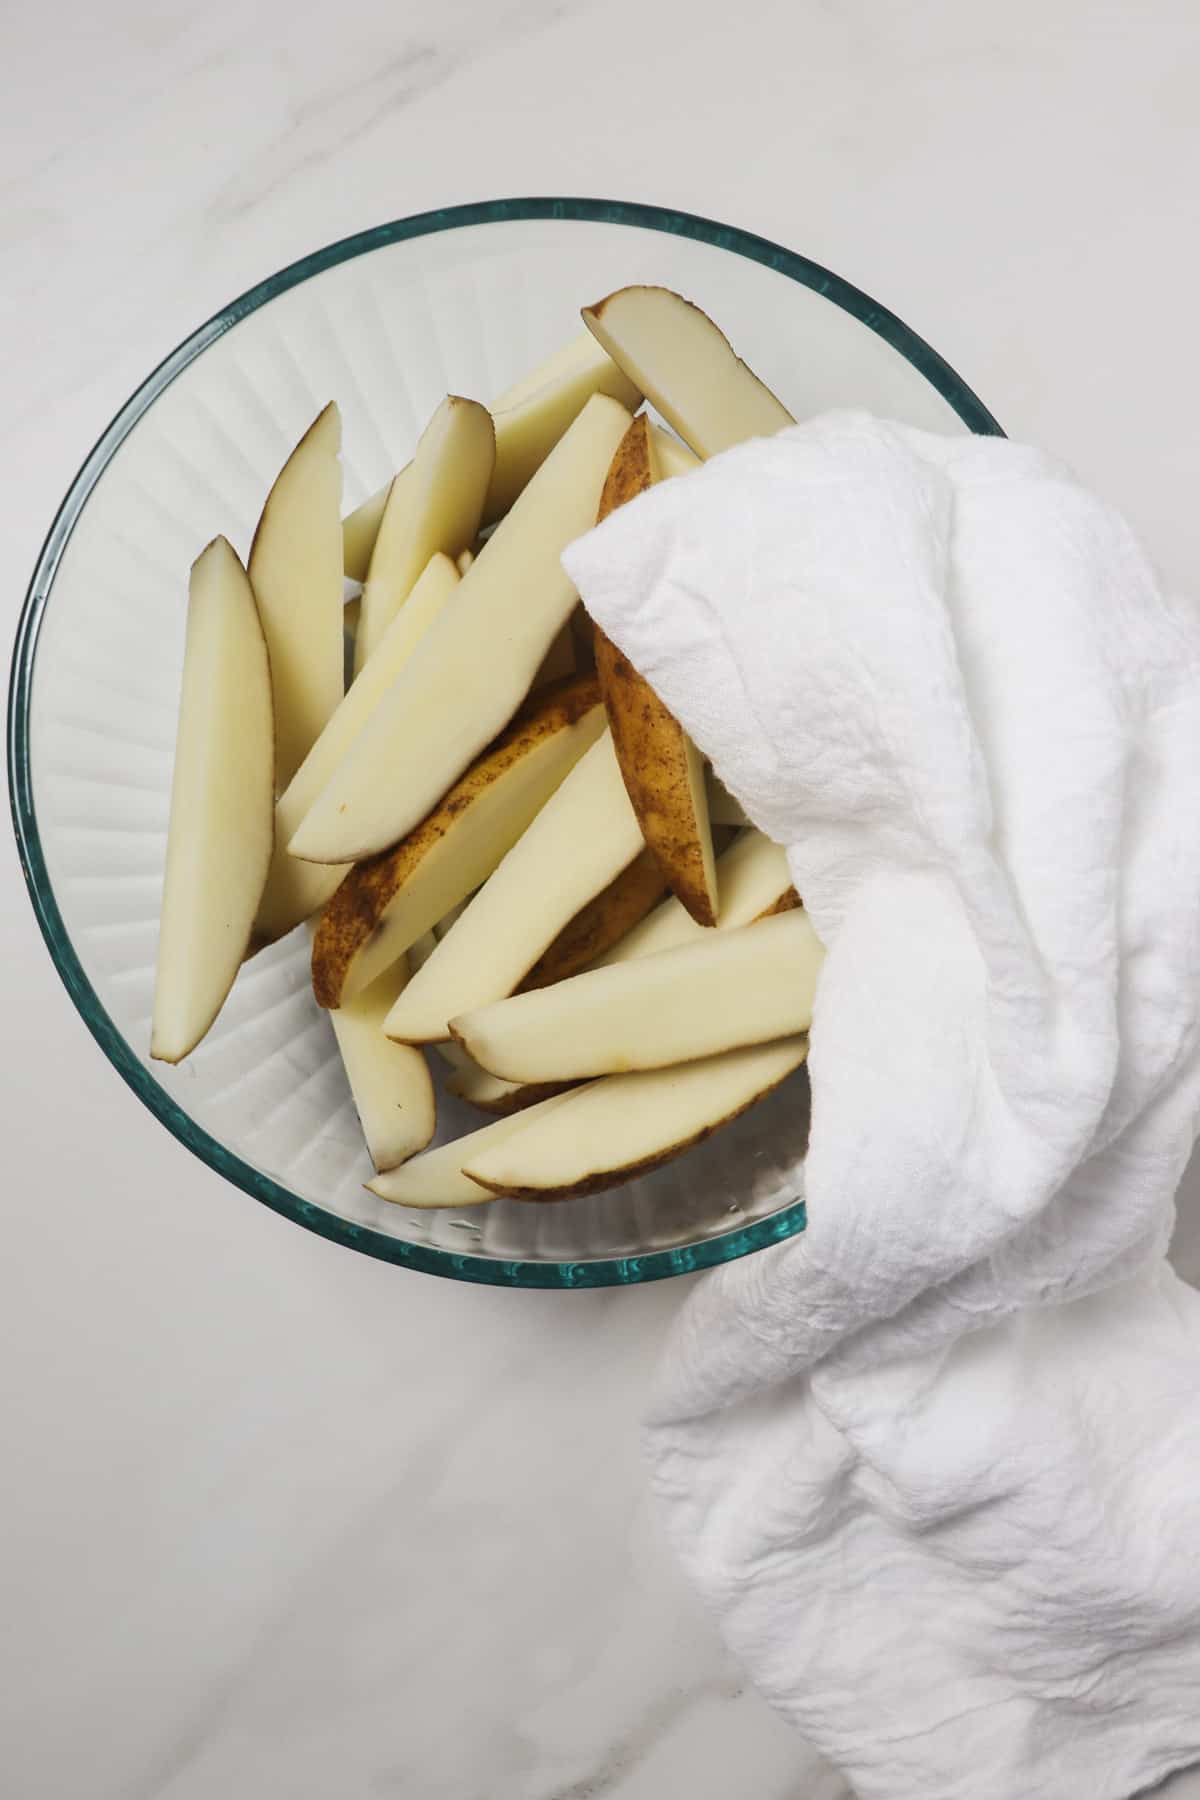 drying potato wedges in glass bowl with a white towel